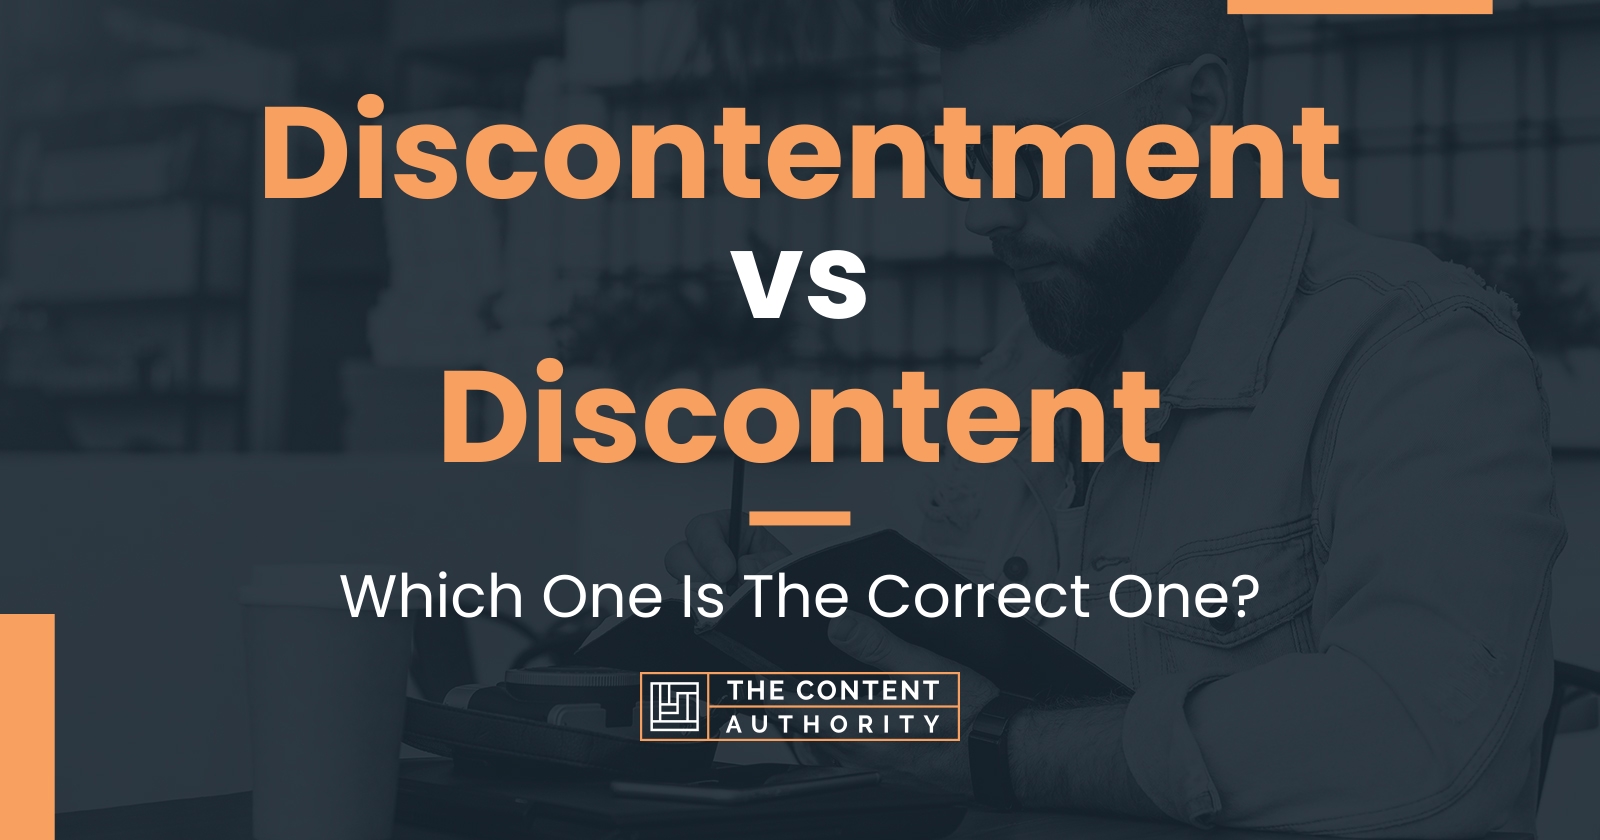 Discontentment vs Discontent: Which One Is The Correct One?